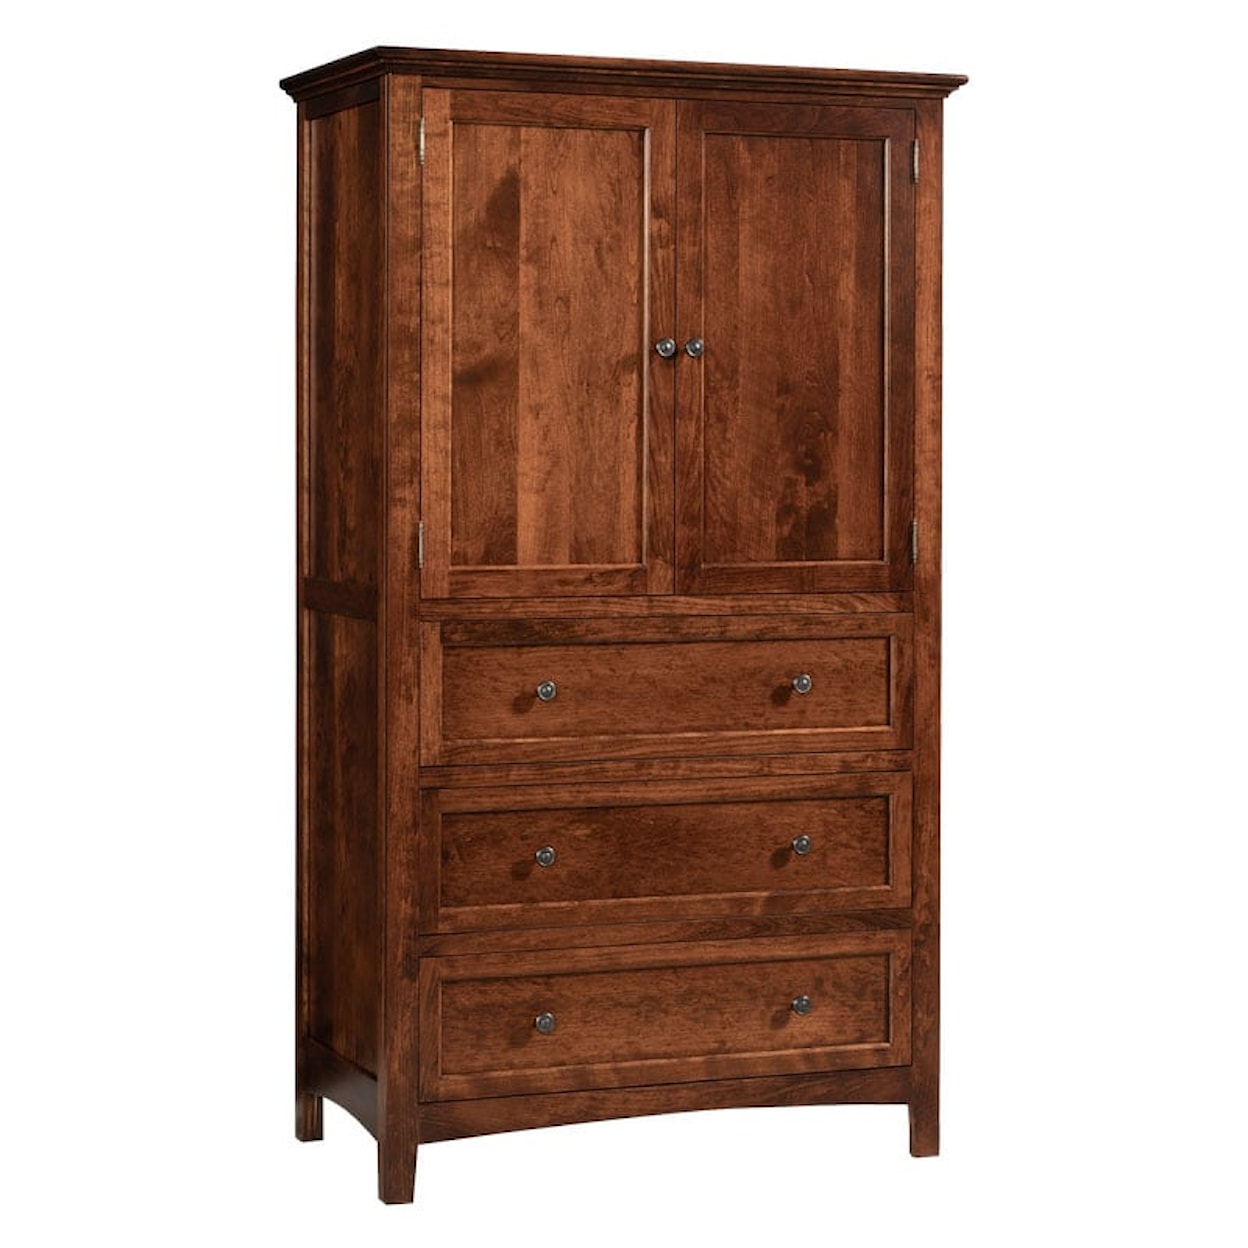 Millcraft Albany Bedroom Armoire